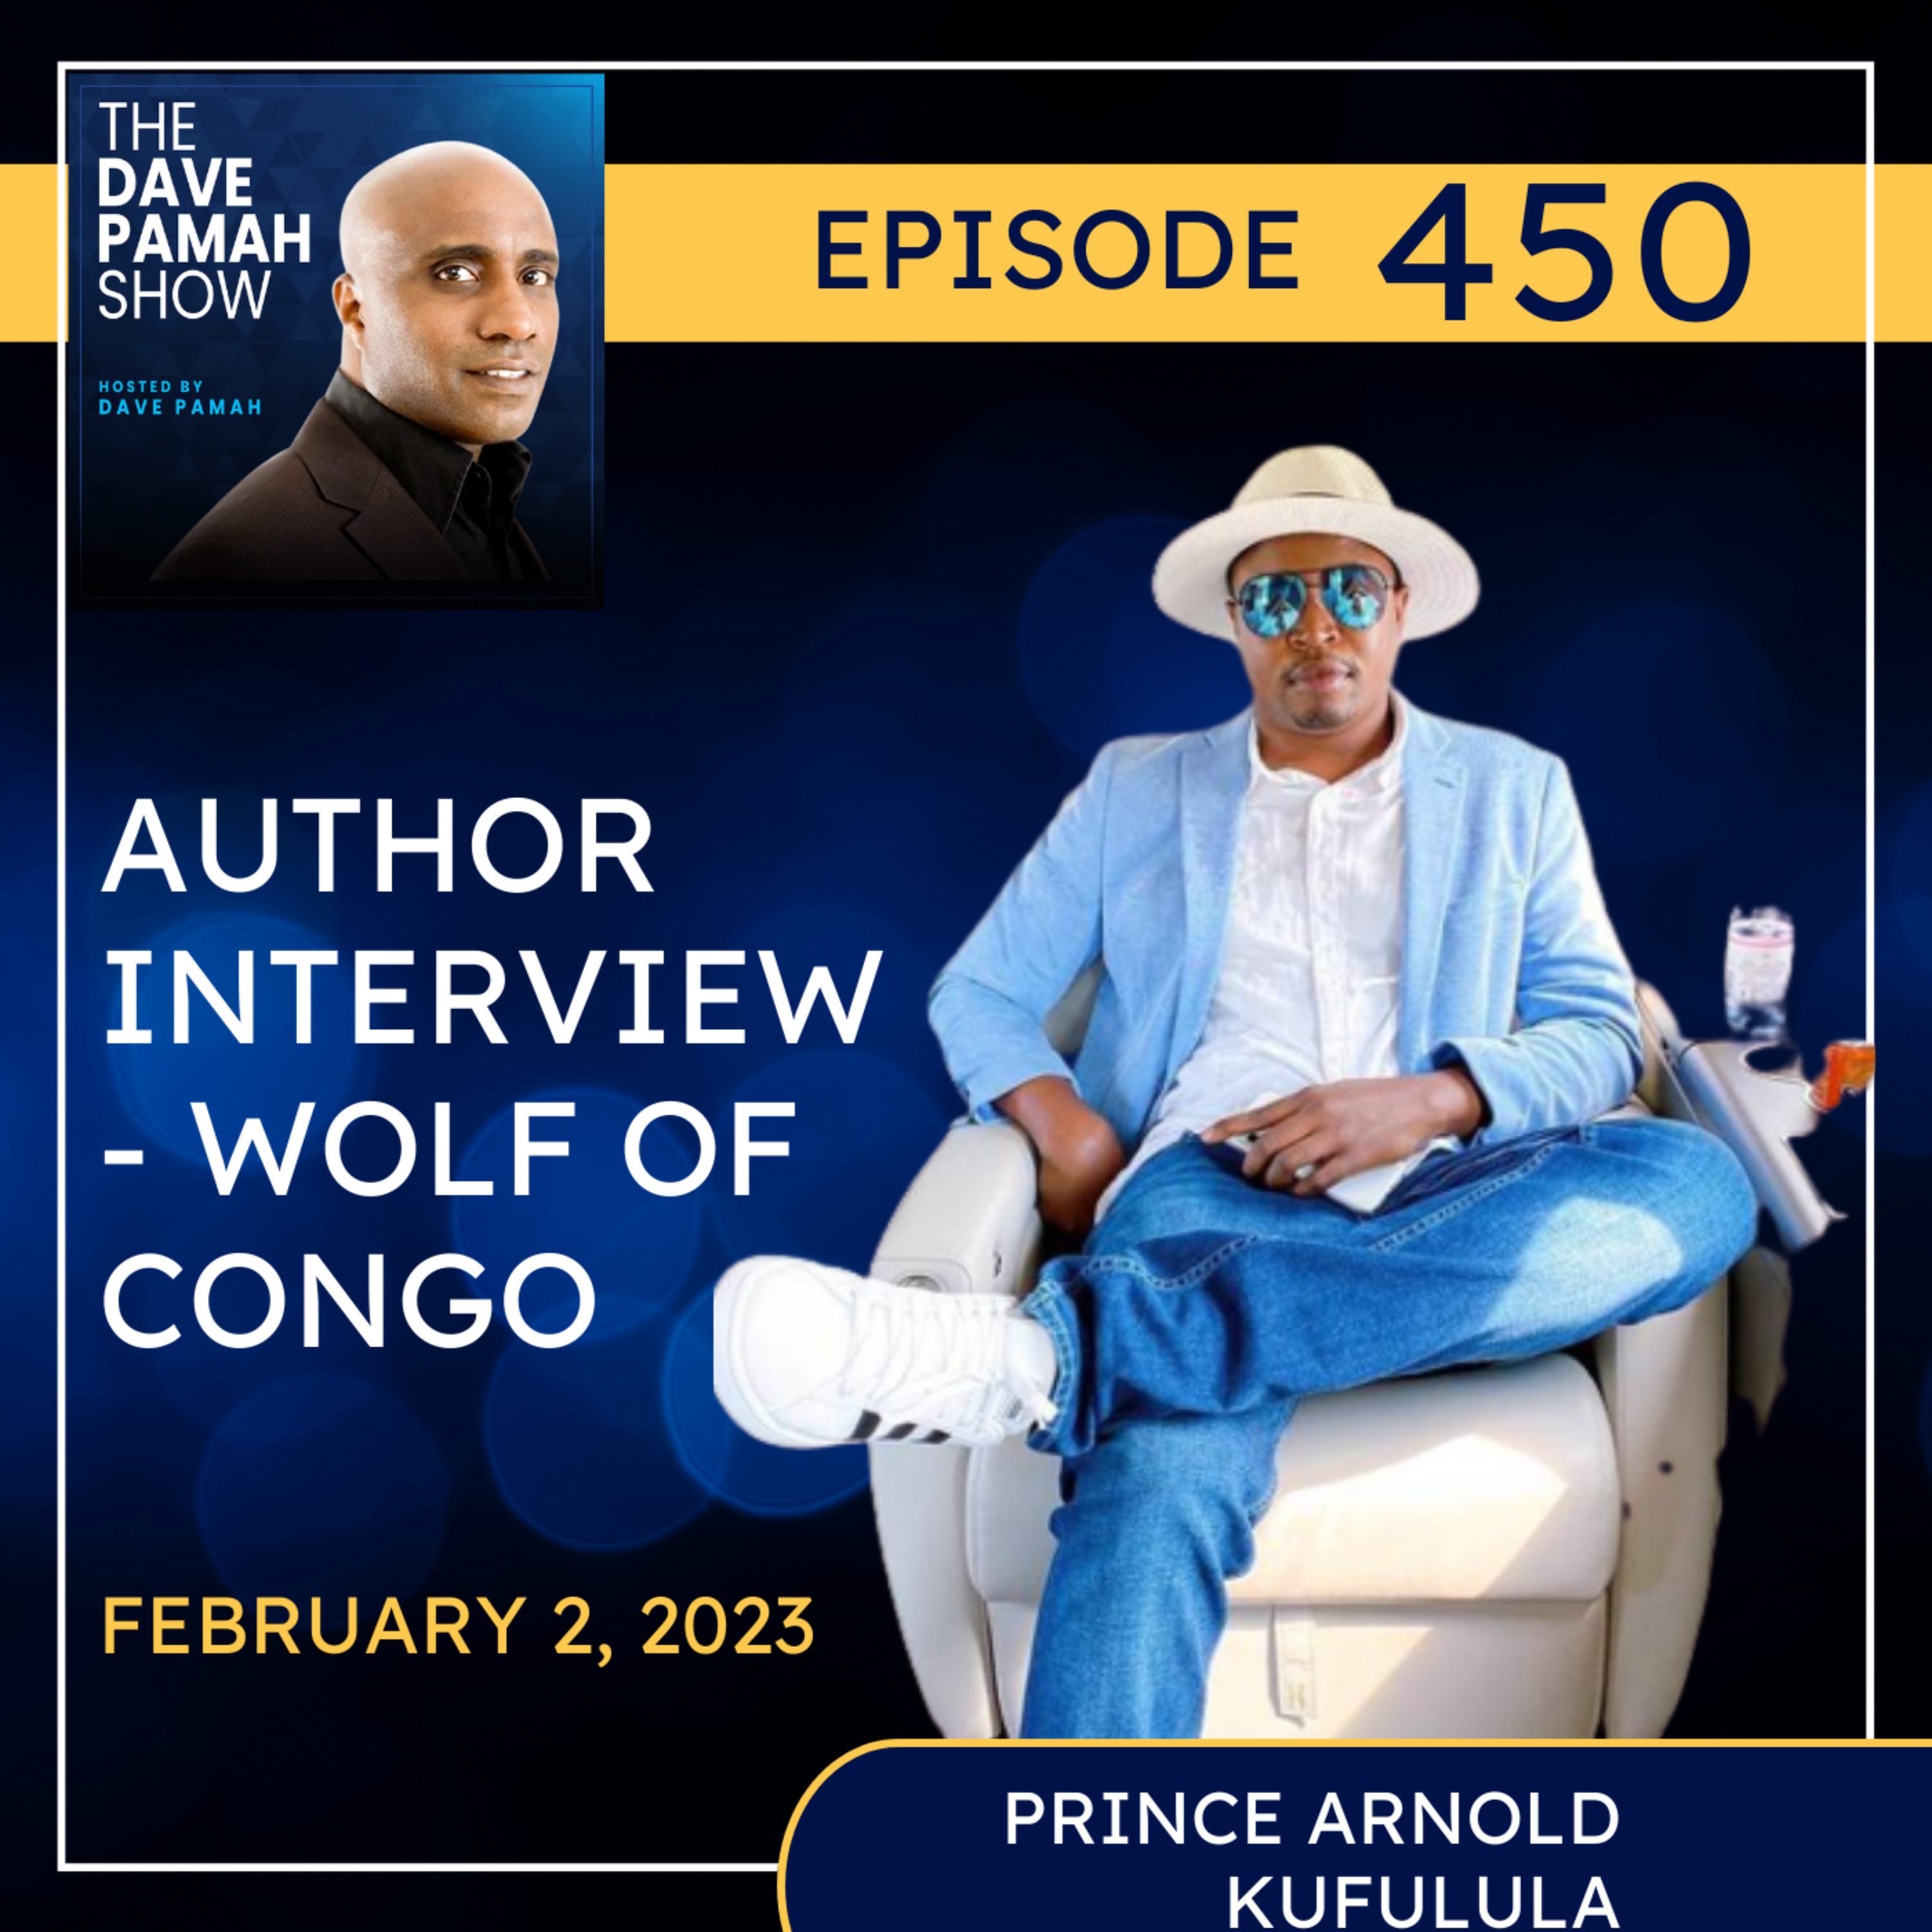 Author Interview - Wolf of Congo with Prince Arnold kufulula